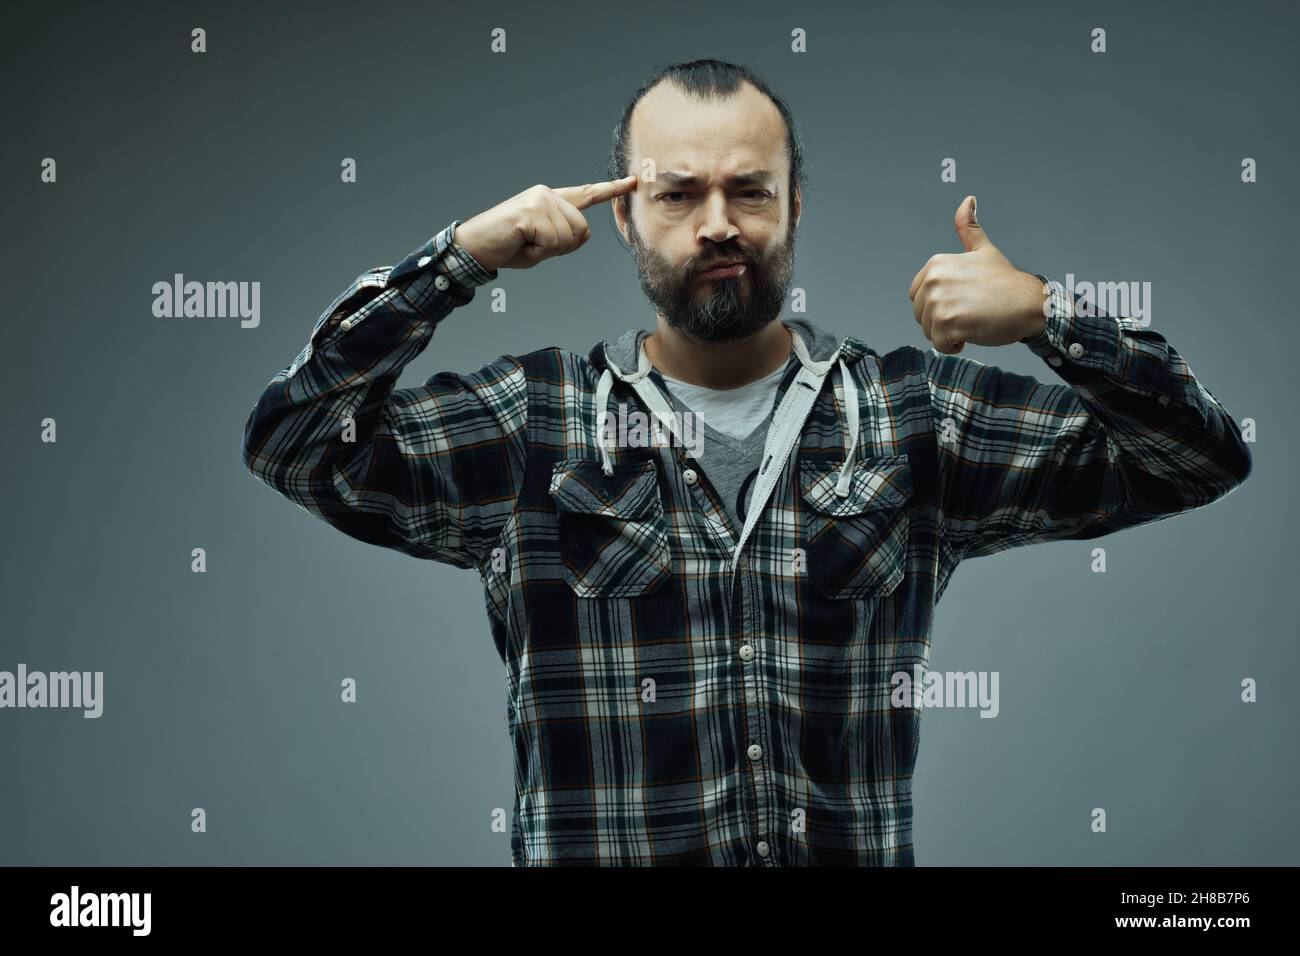 Think about it and we will succeed, trust me! - optimistic man pointing to his brain while giving a thumbs up gesture with a wry smile over a grey stu Stock Photo